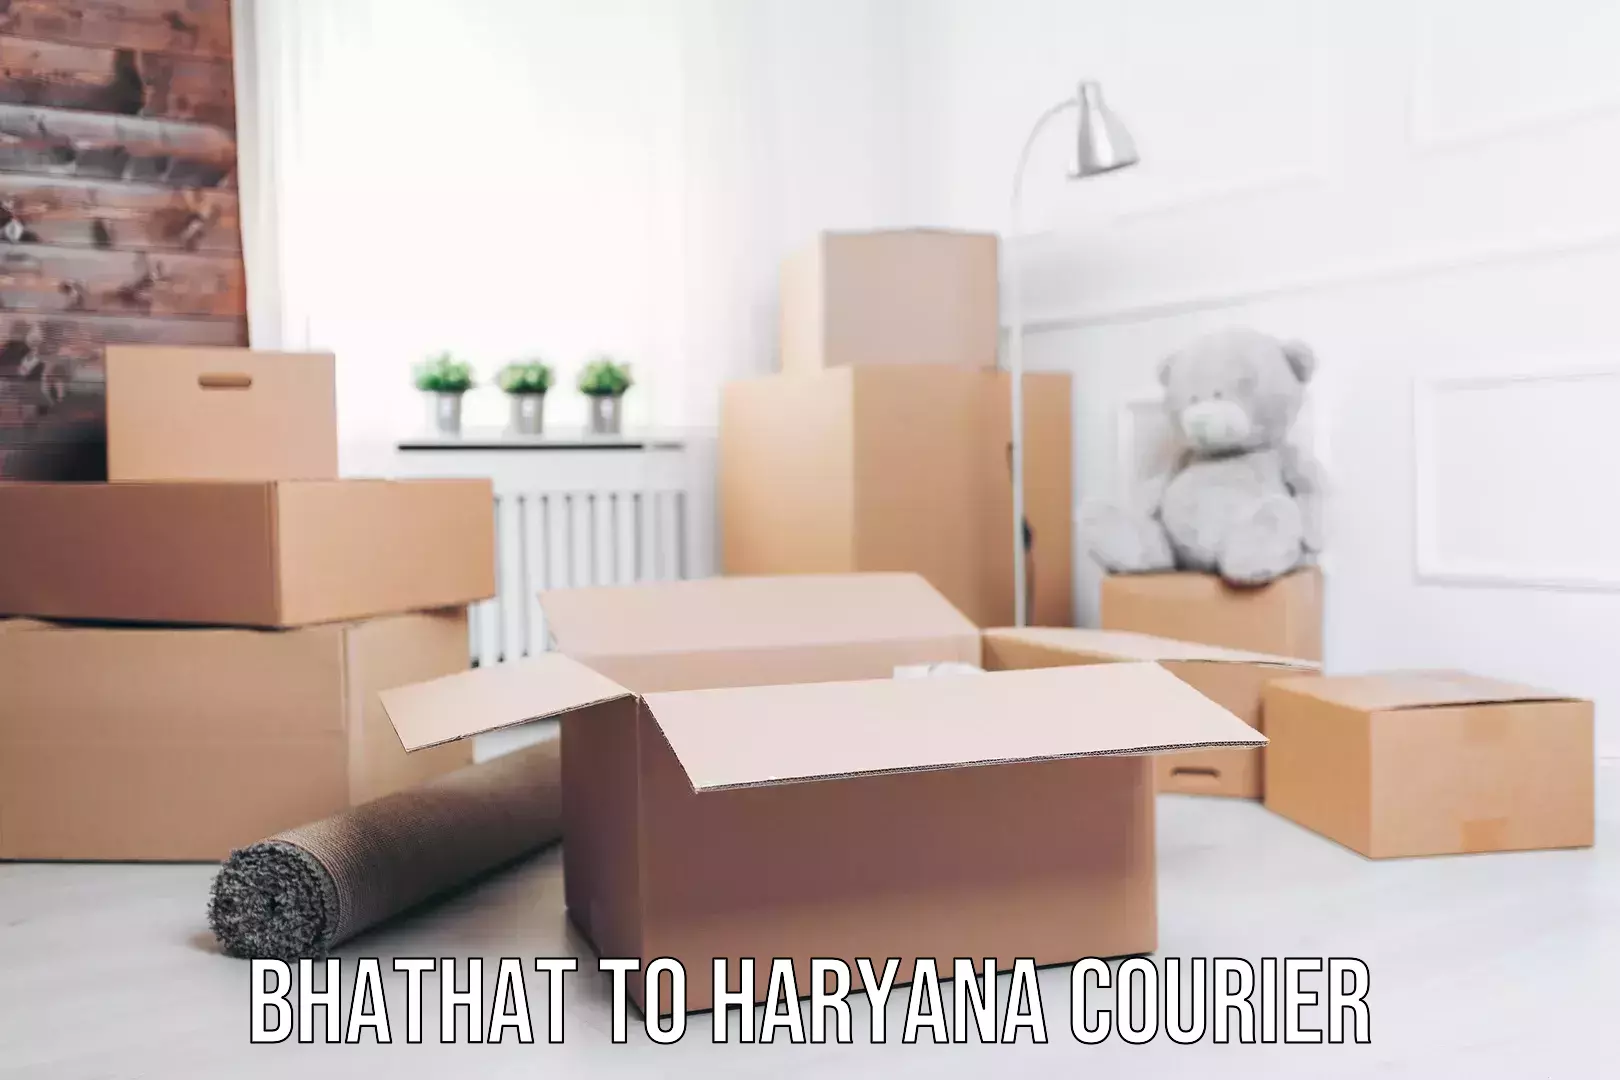 Advanced shipping network Bhathat to Haryana